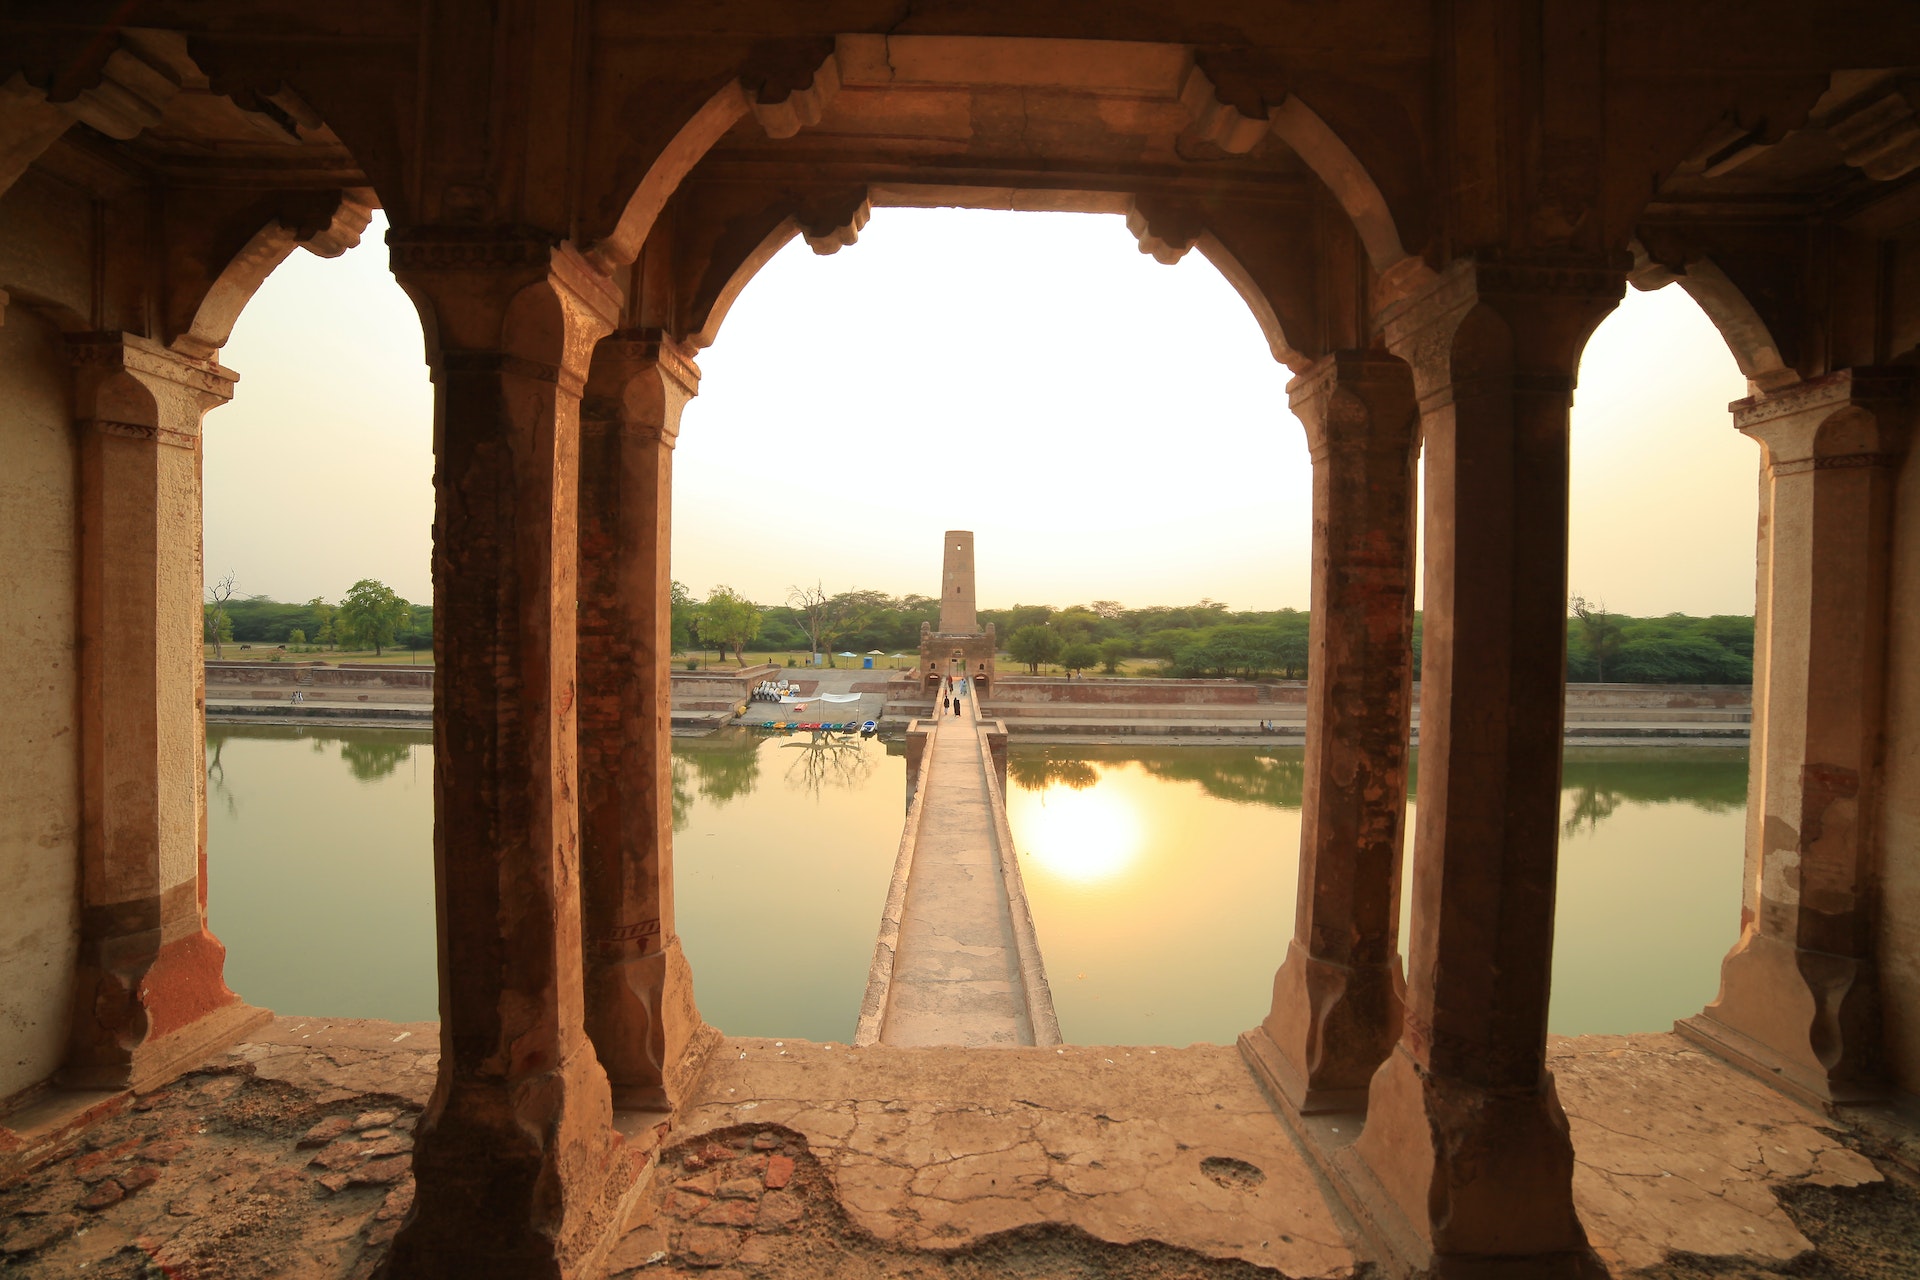 A view across the water from the pavilion in Hiran Minar, Pakistan